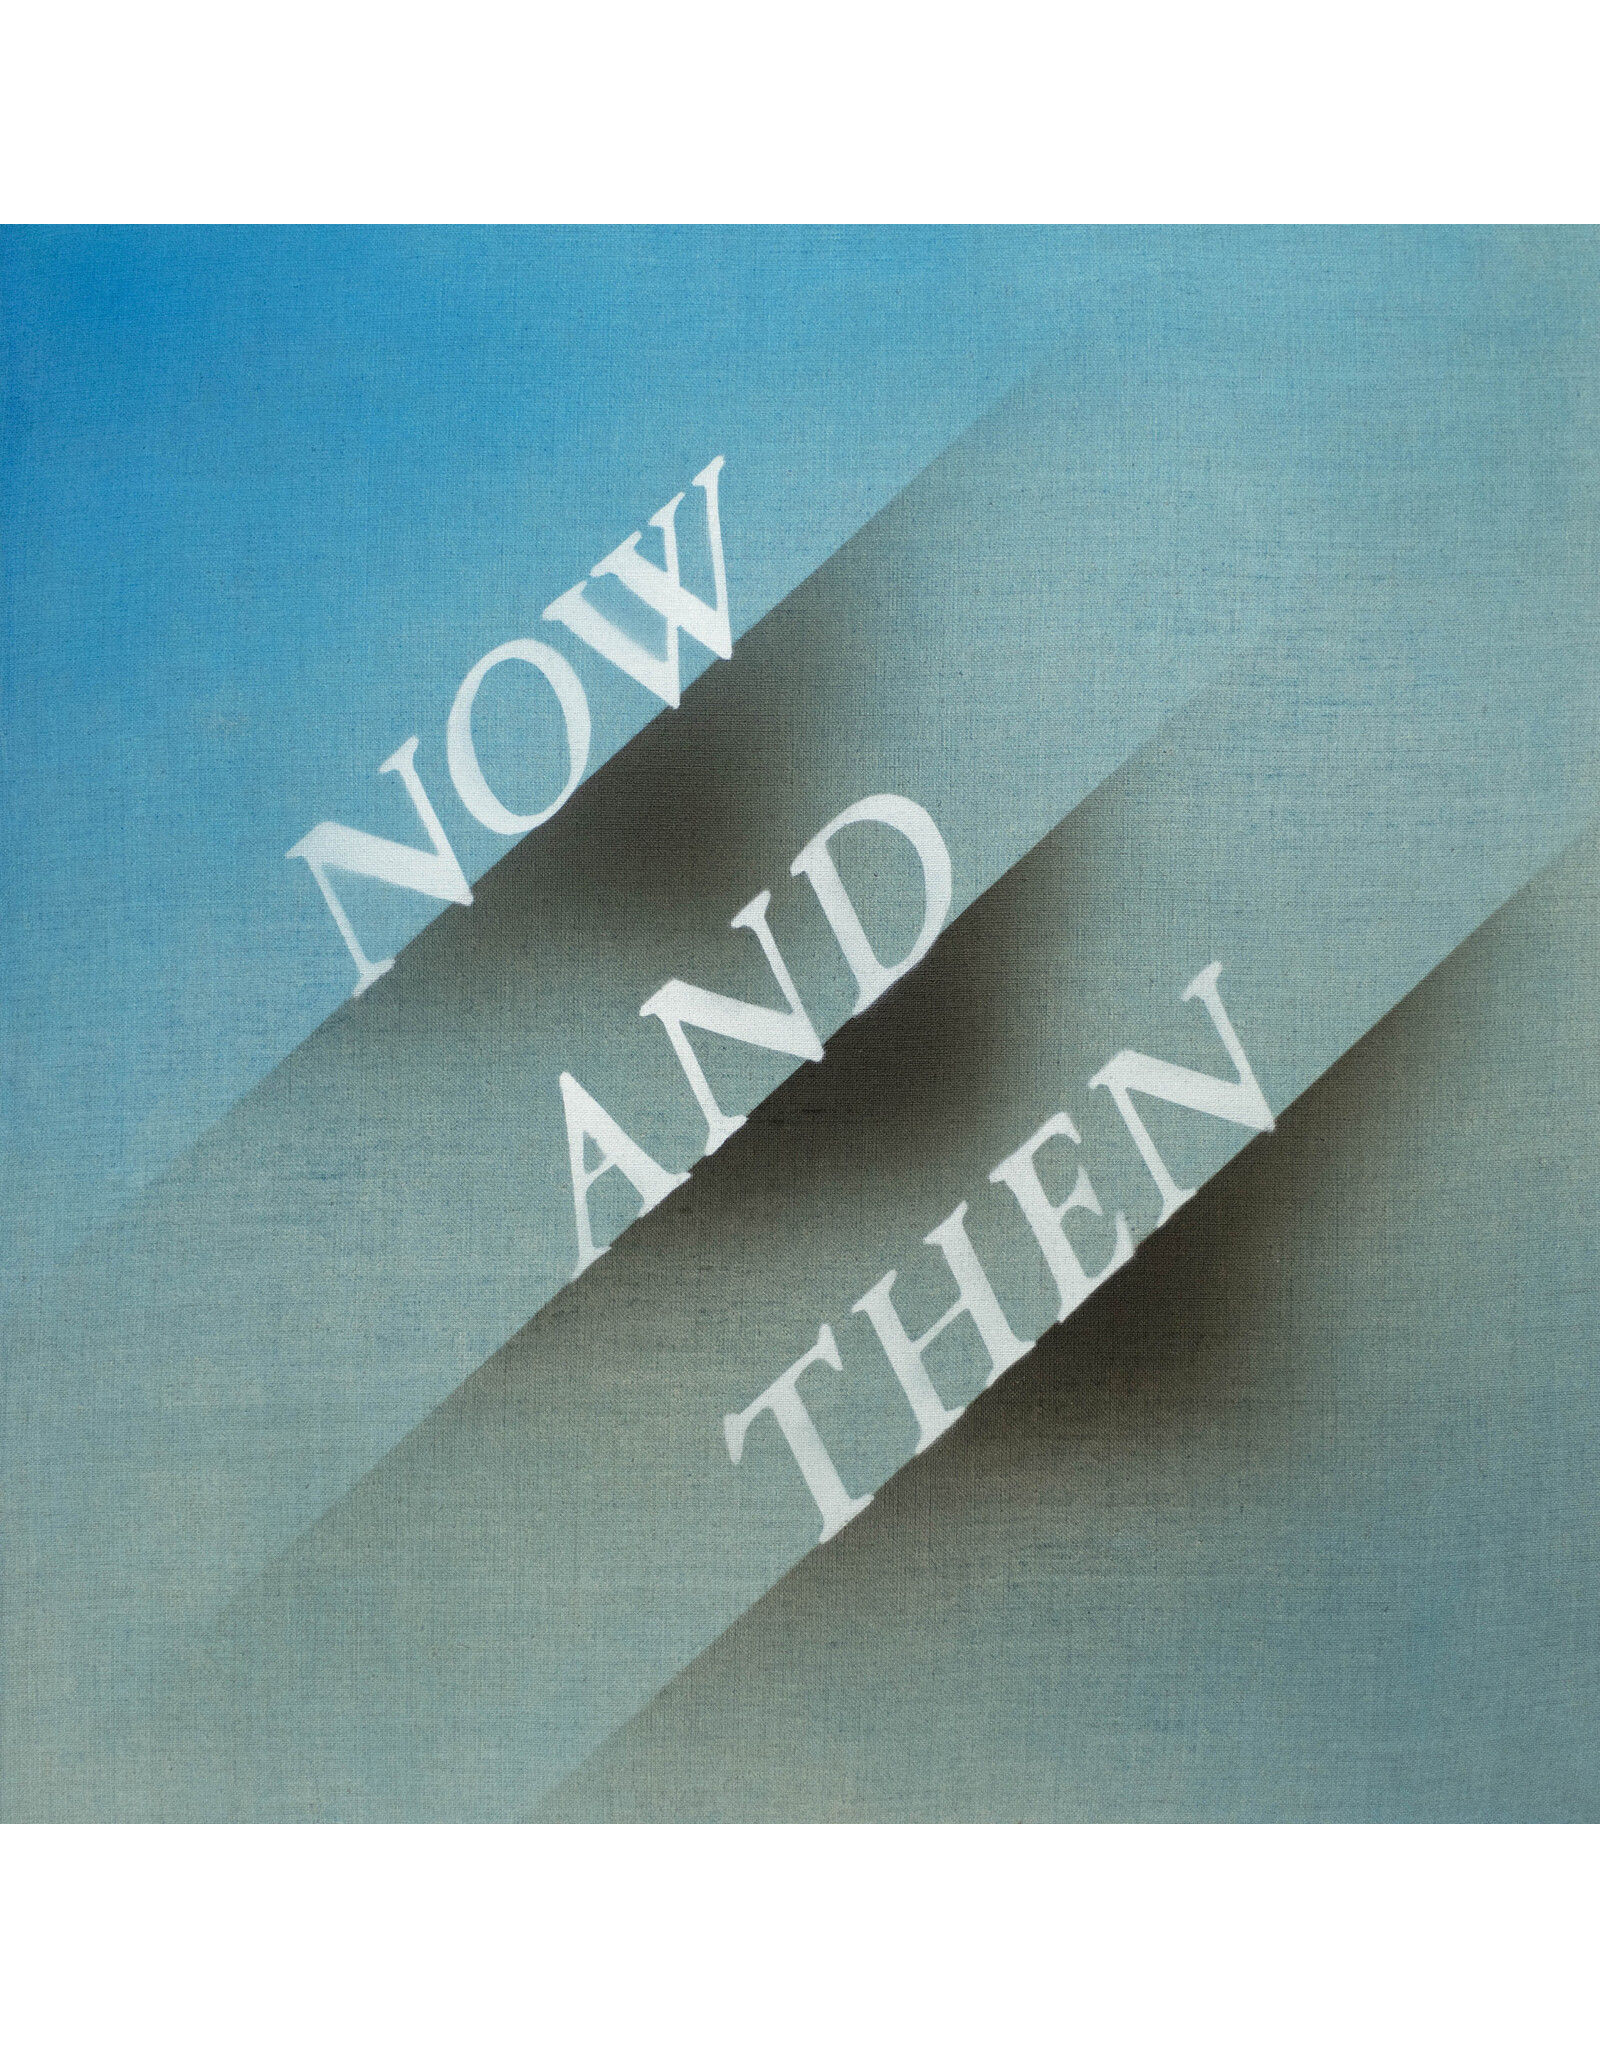 Beatles - Now And Then (12" Single)